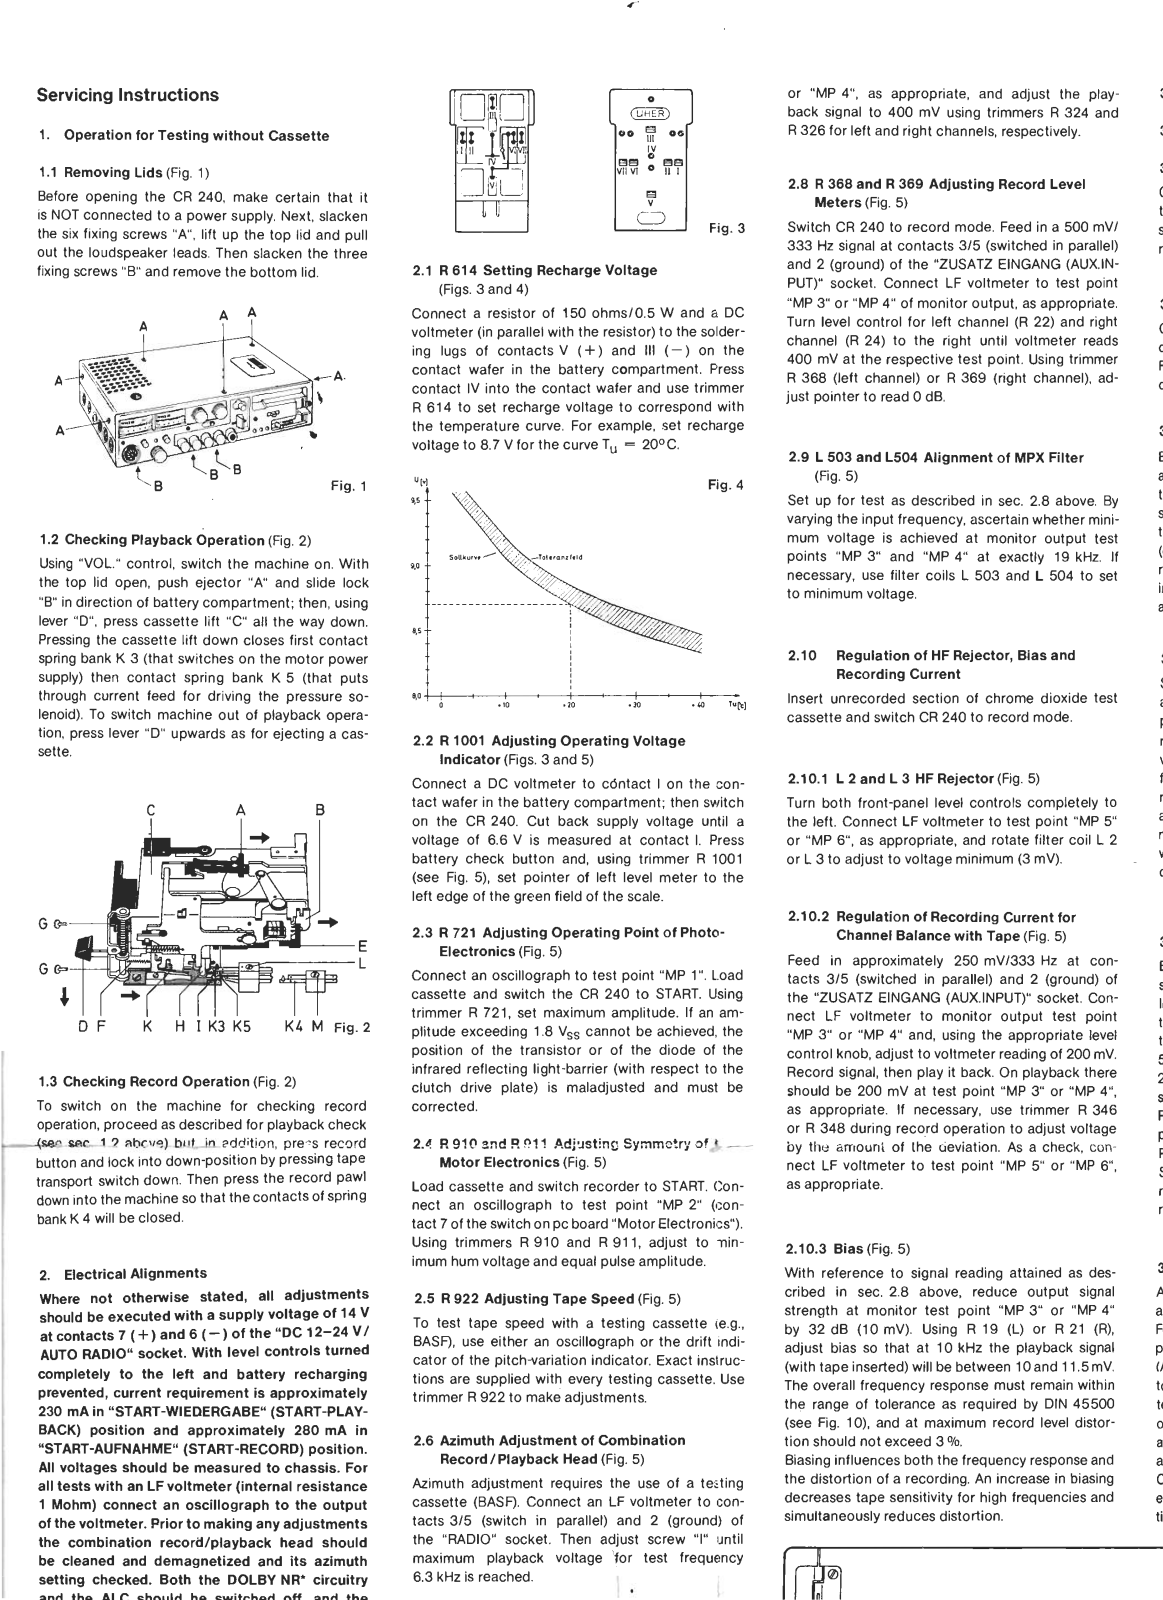 Uher CR-240 Service manual